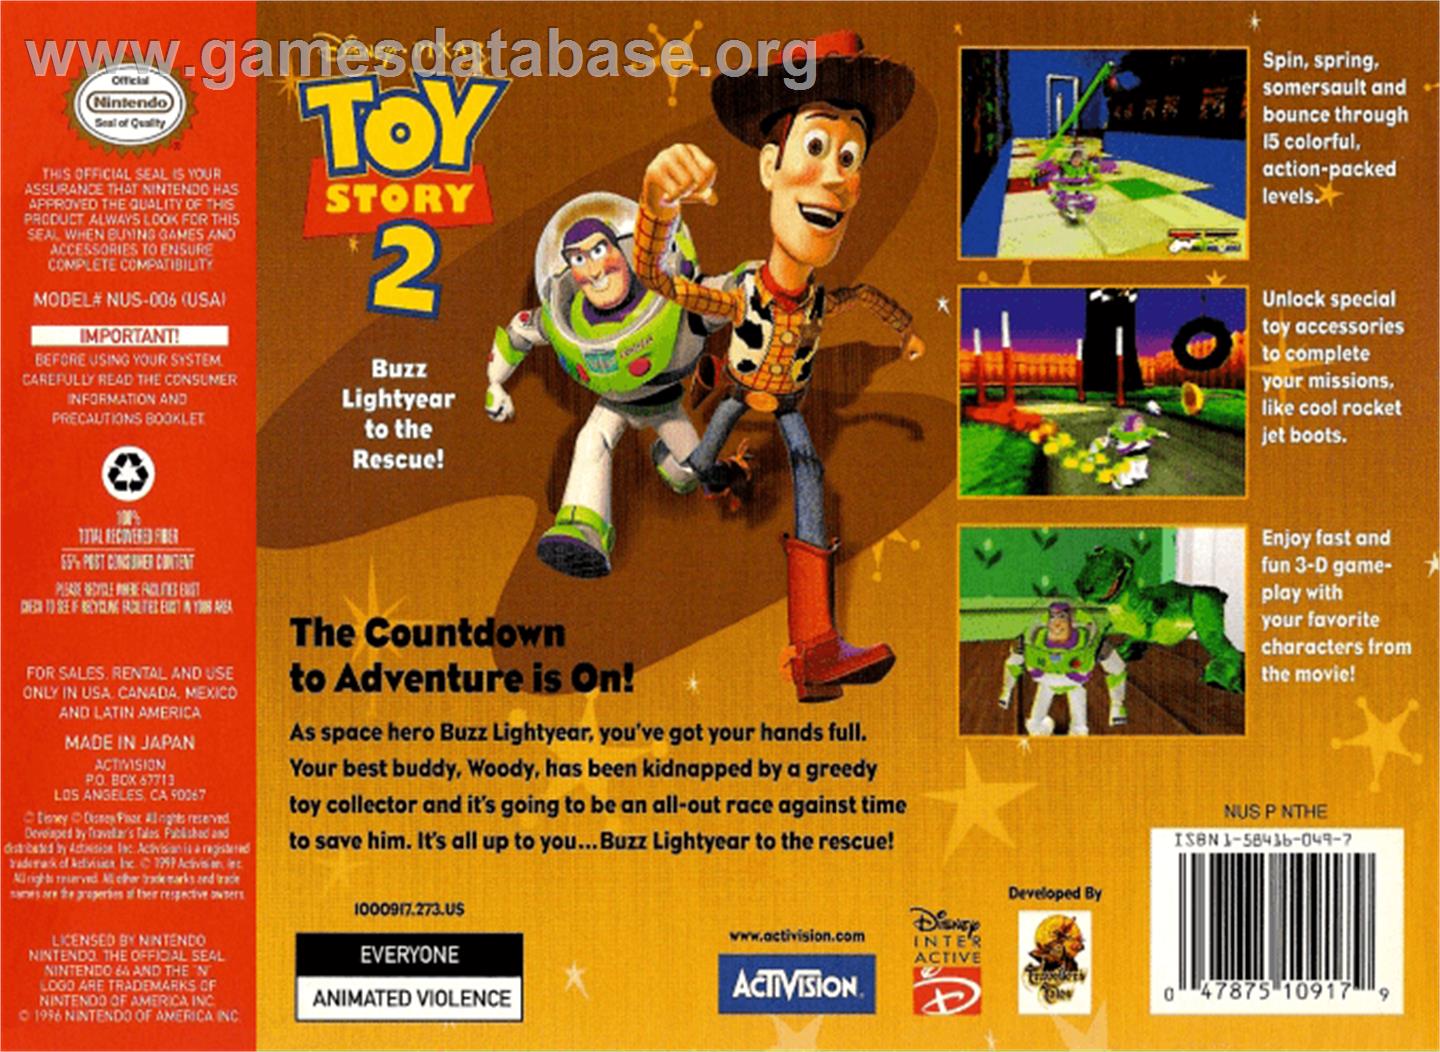 Toy Story 2: Buzz Lightyear to the Rescue - Nintendo N64 - Artwork - Box Back